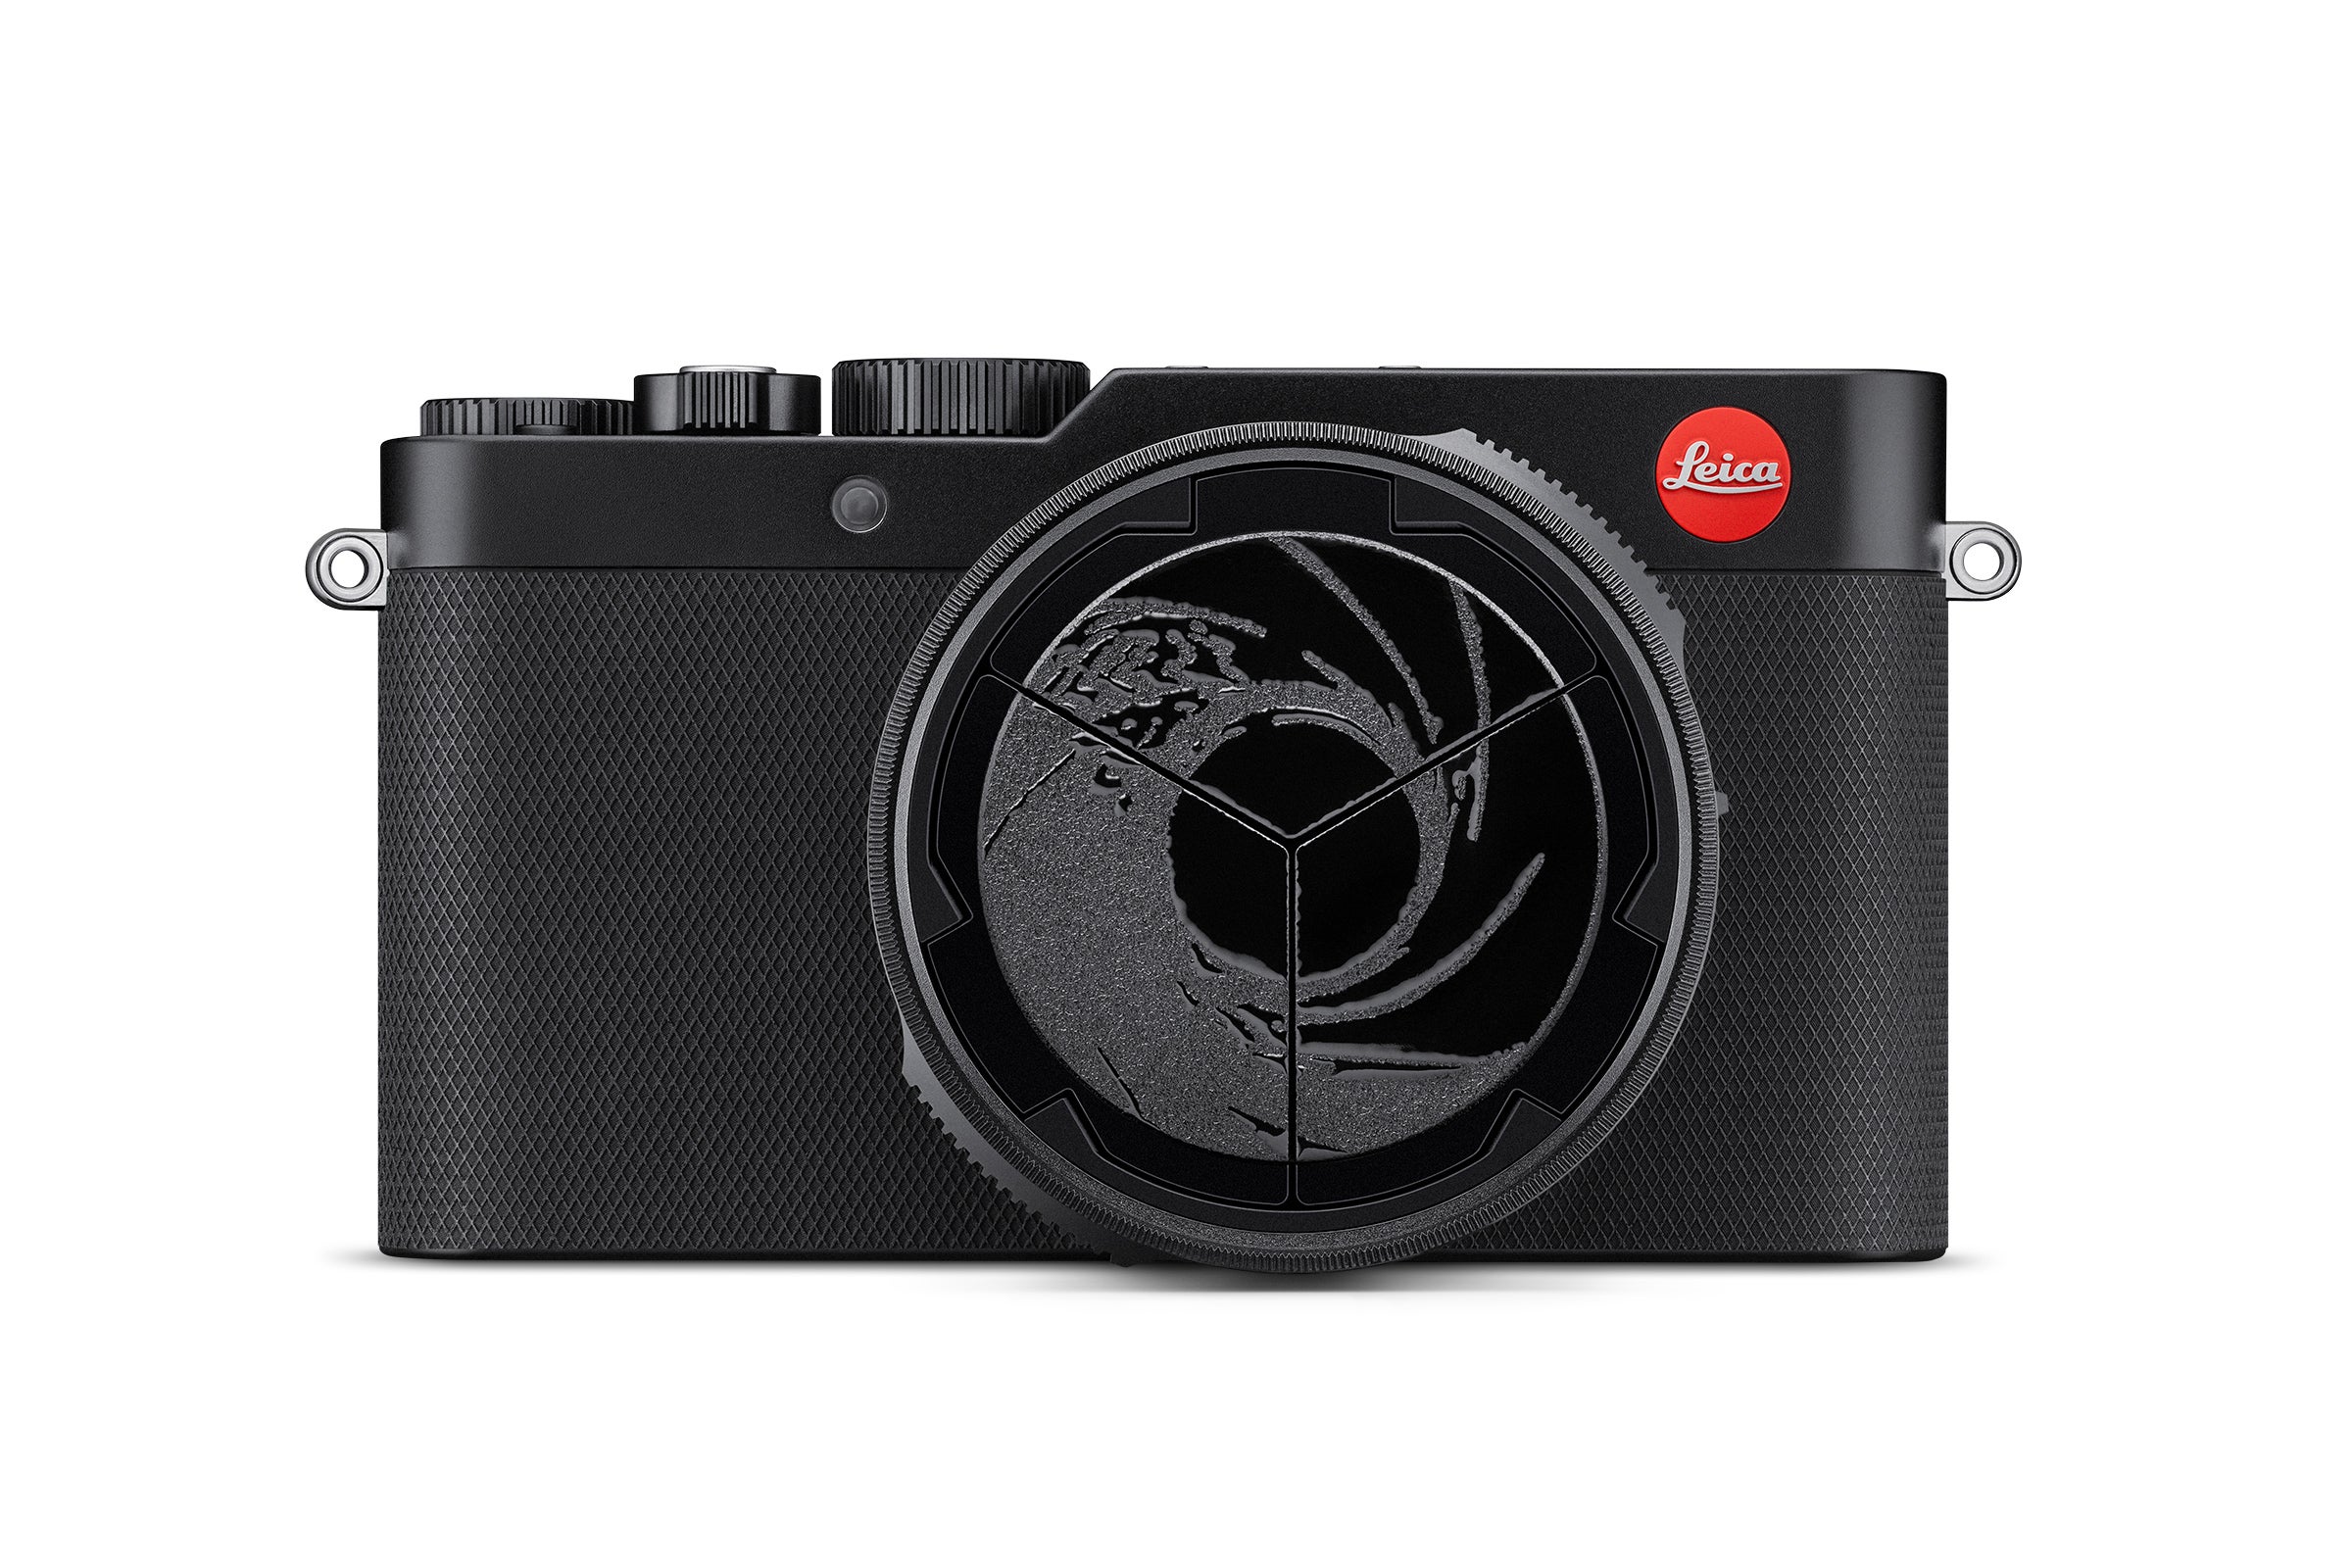 Leica D-Lux 7 007 Edition on white background